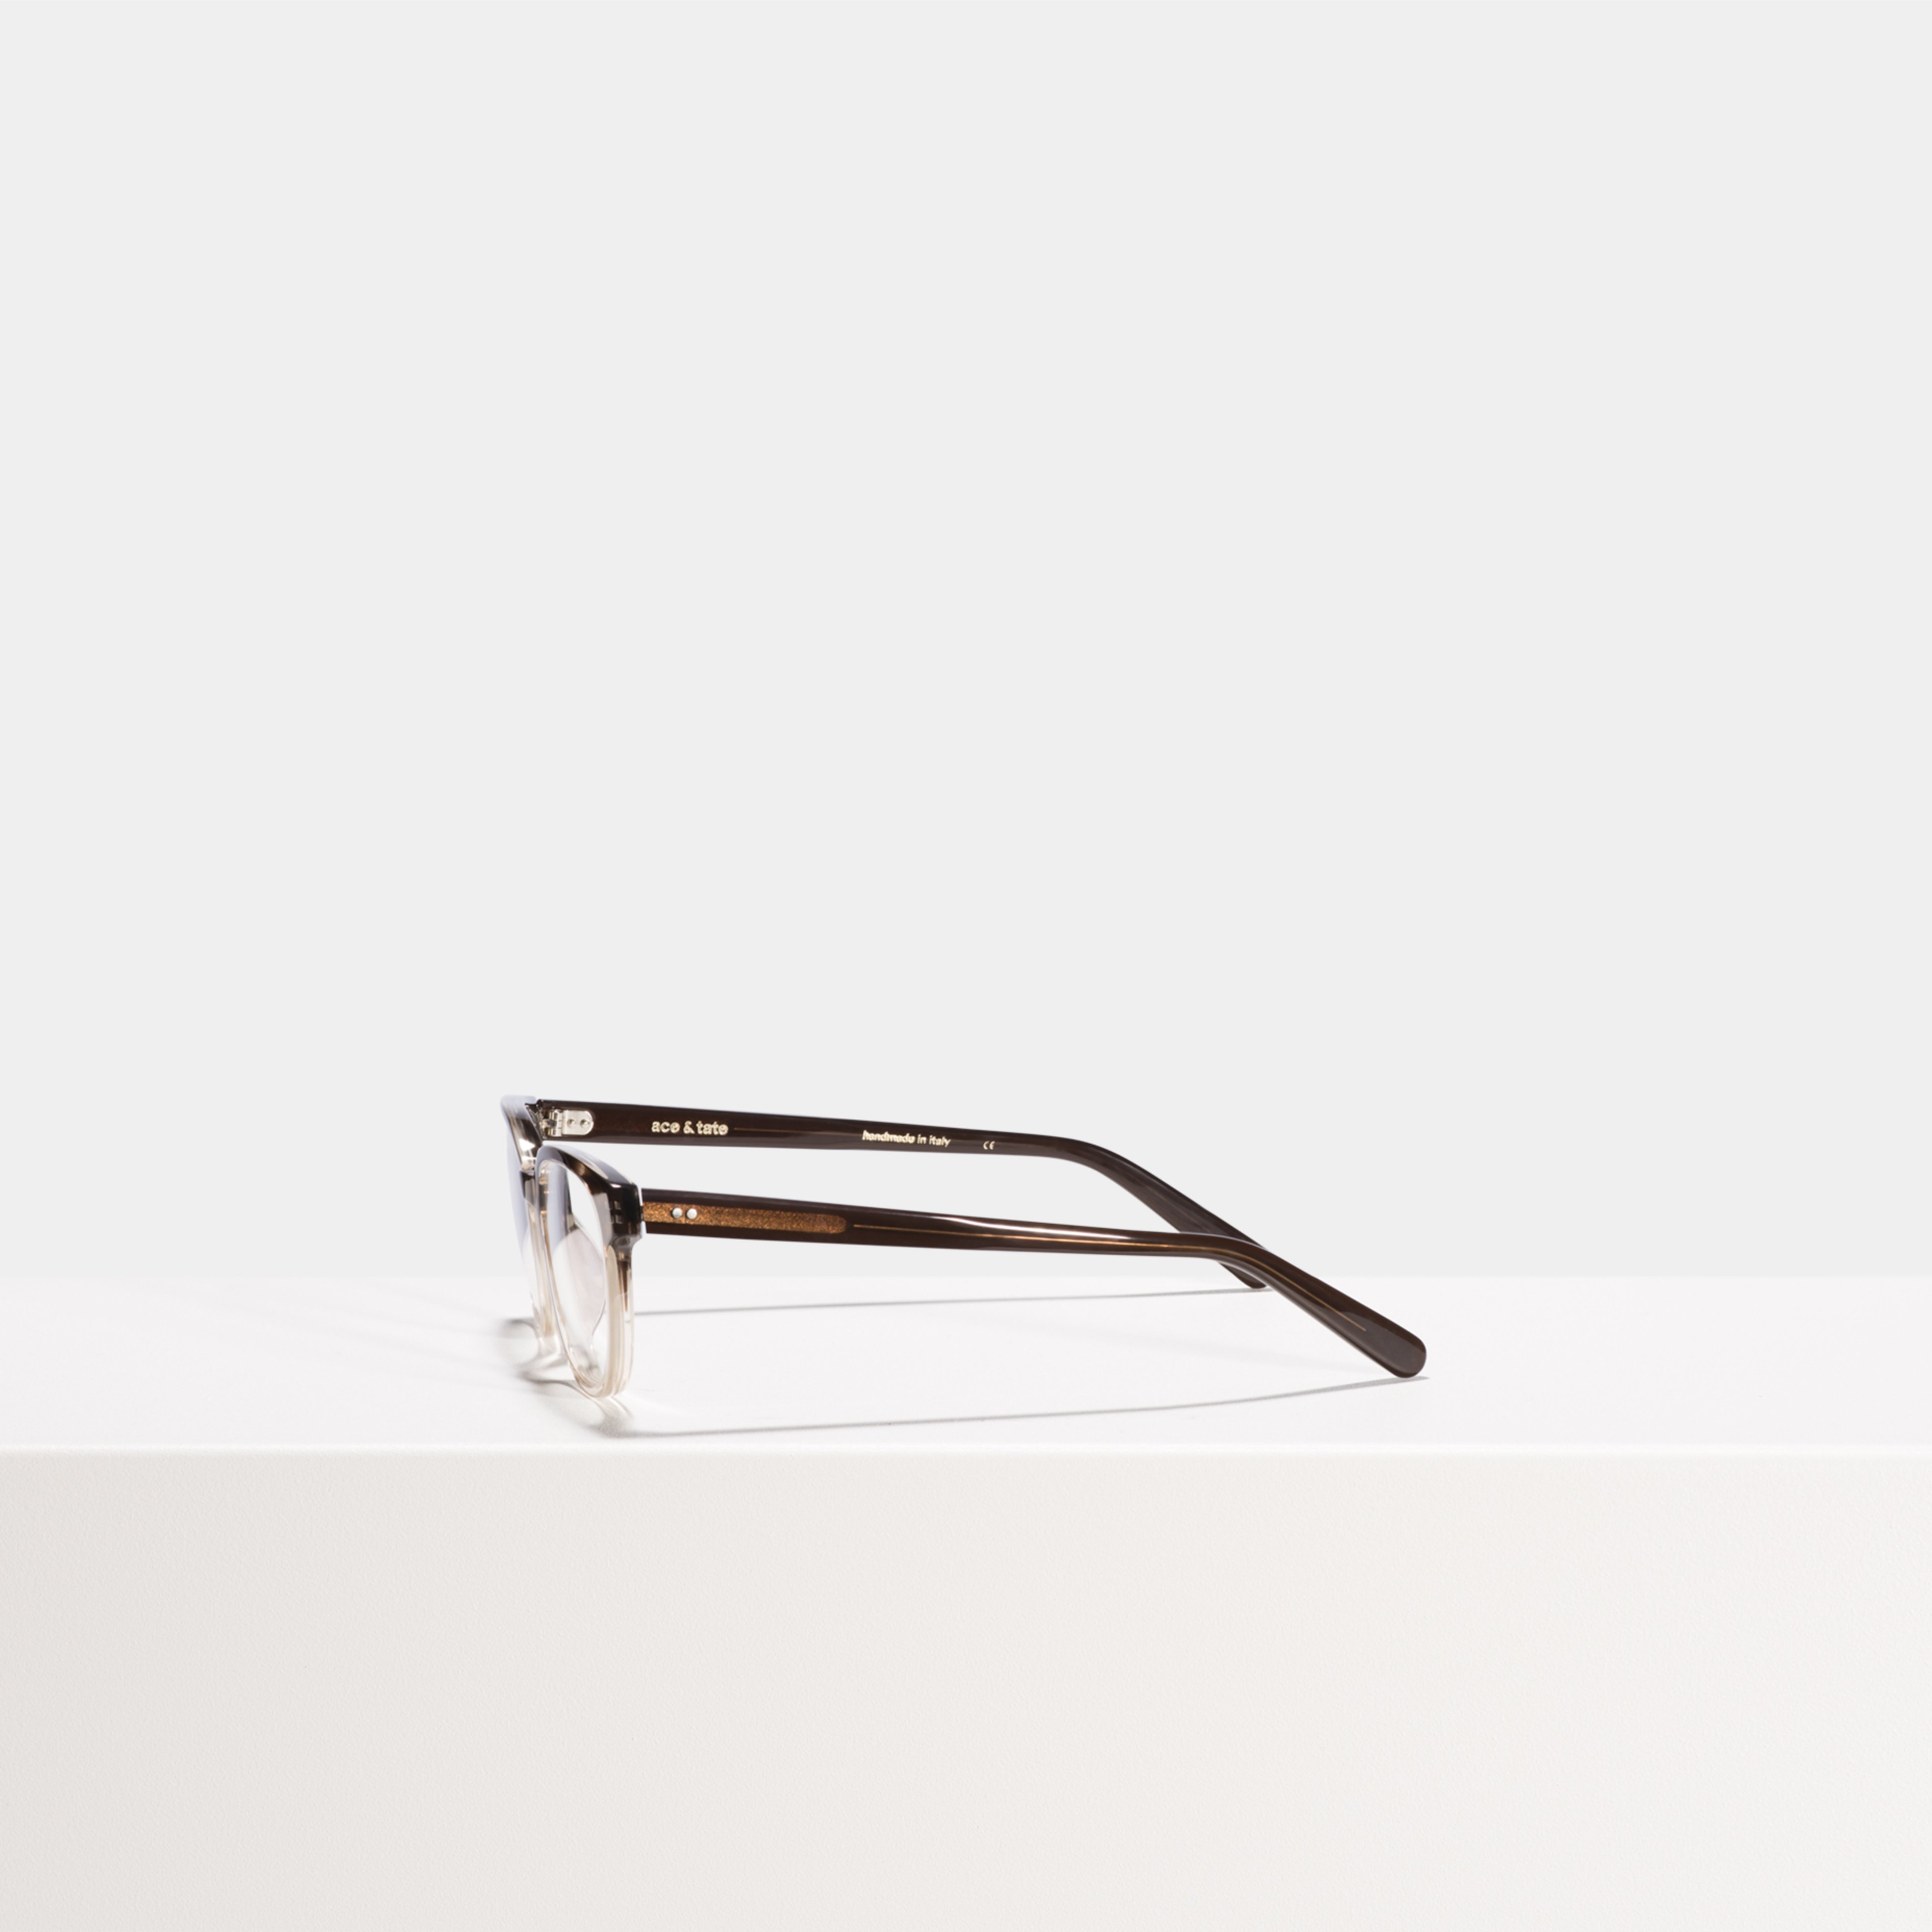 Ace & Tate Optiques | oval Acétate in Marron, Clair